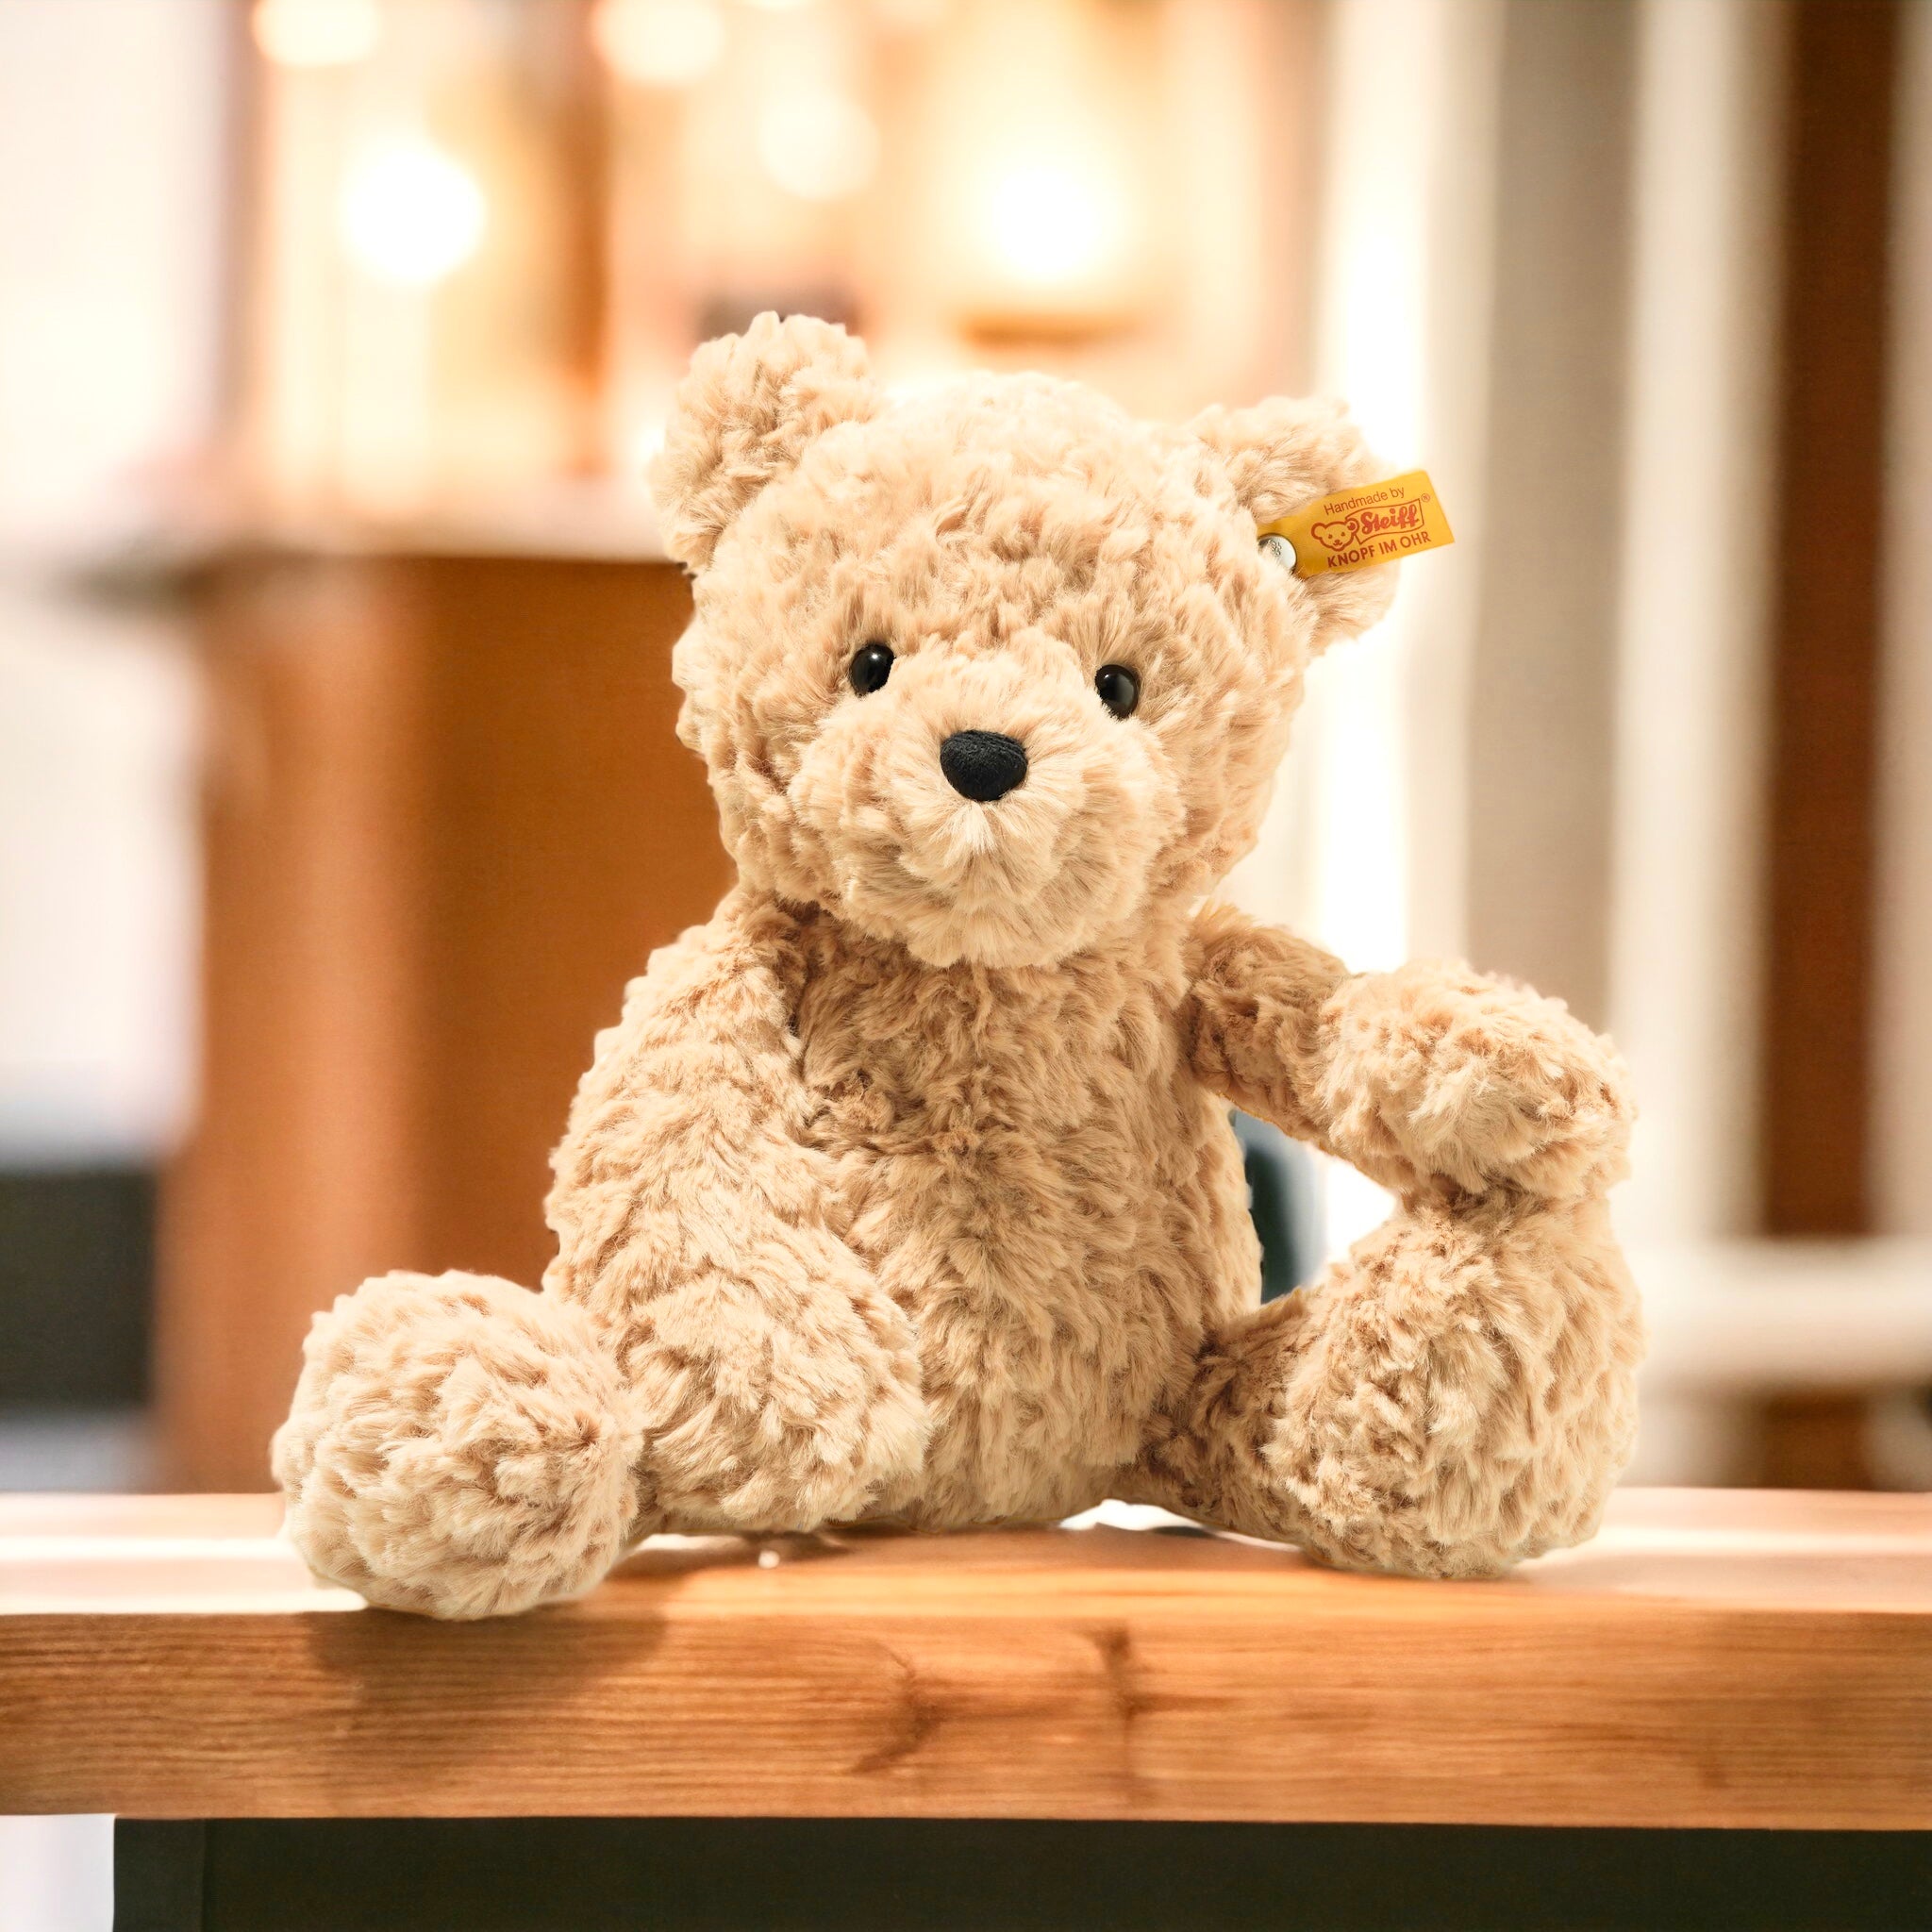 New Baby and Parent Hamper: Steiff Jimmy Teddy Bear and Treats